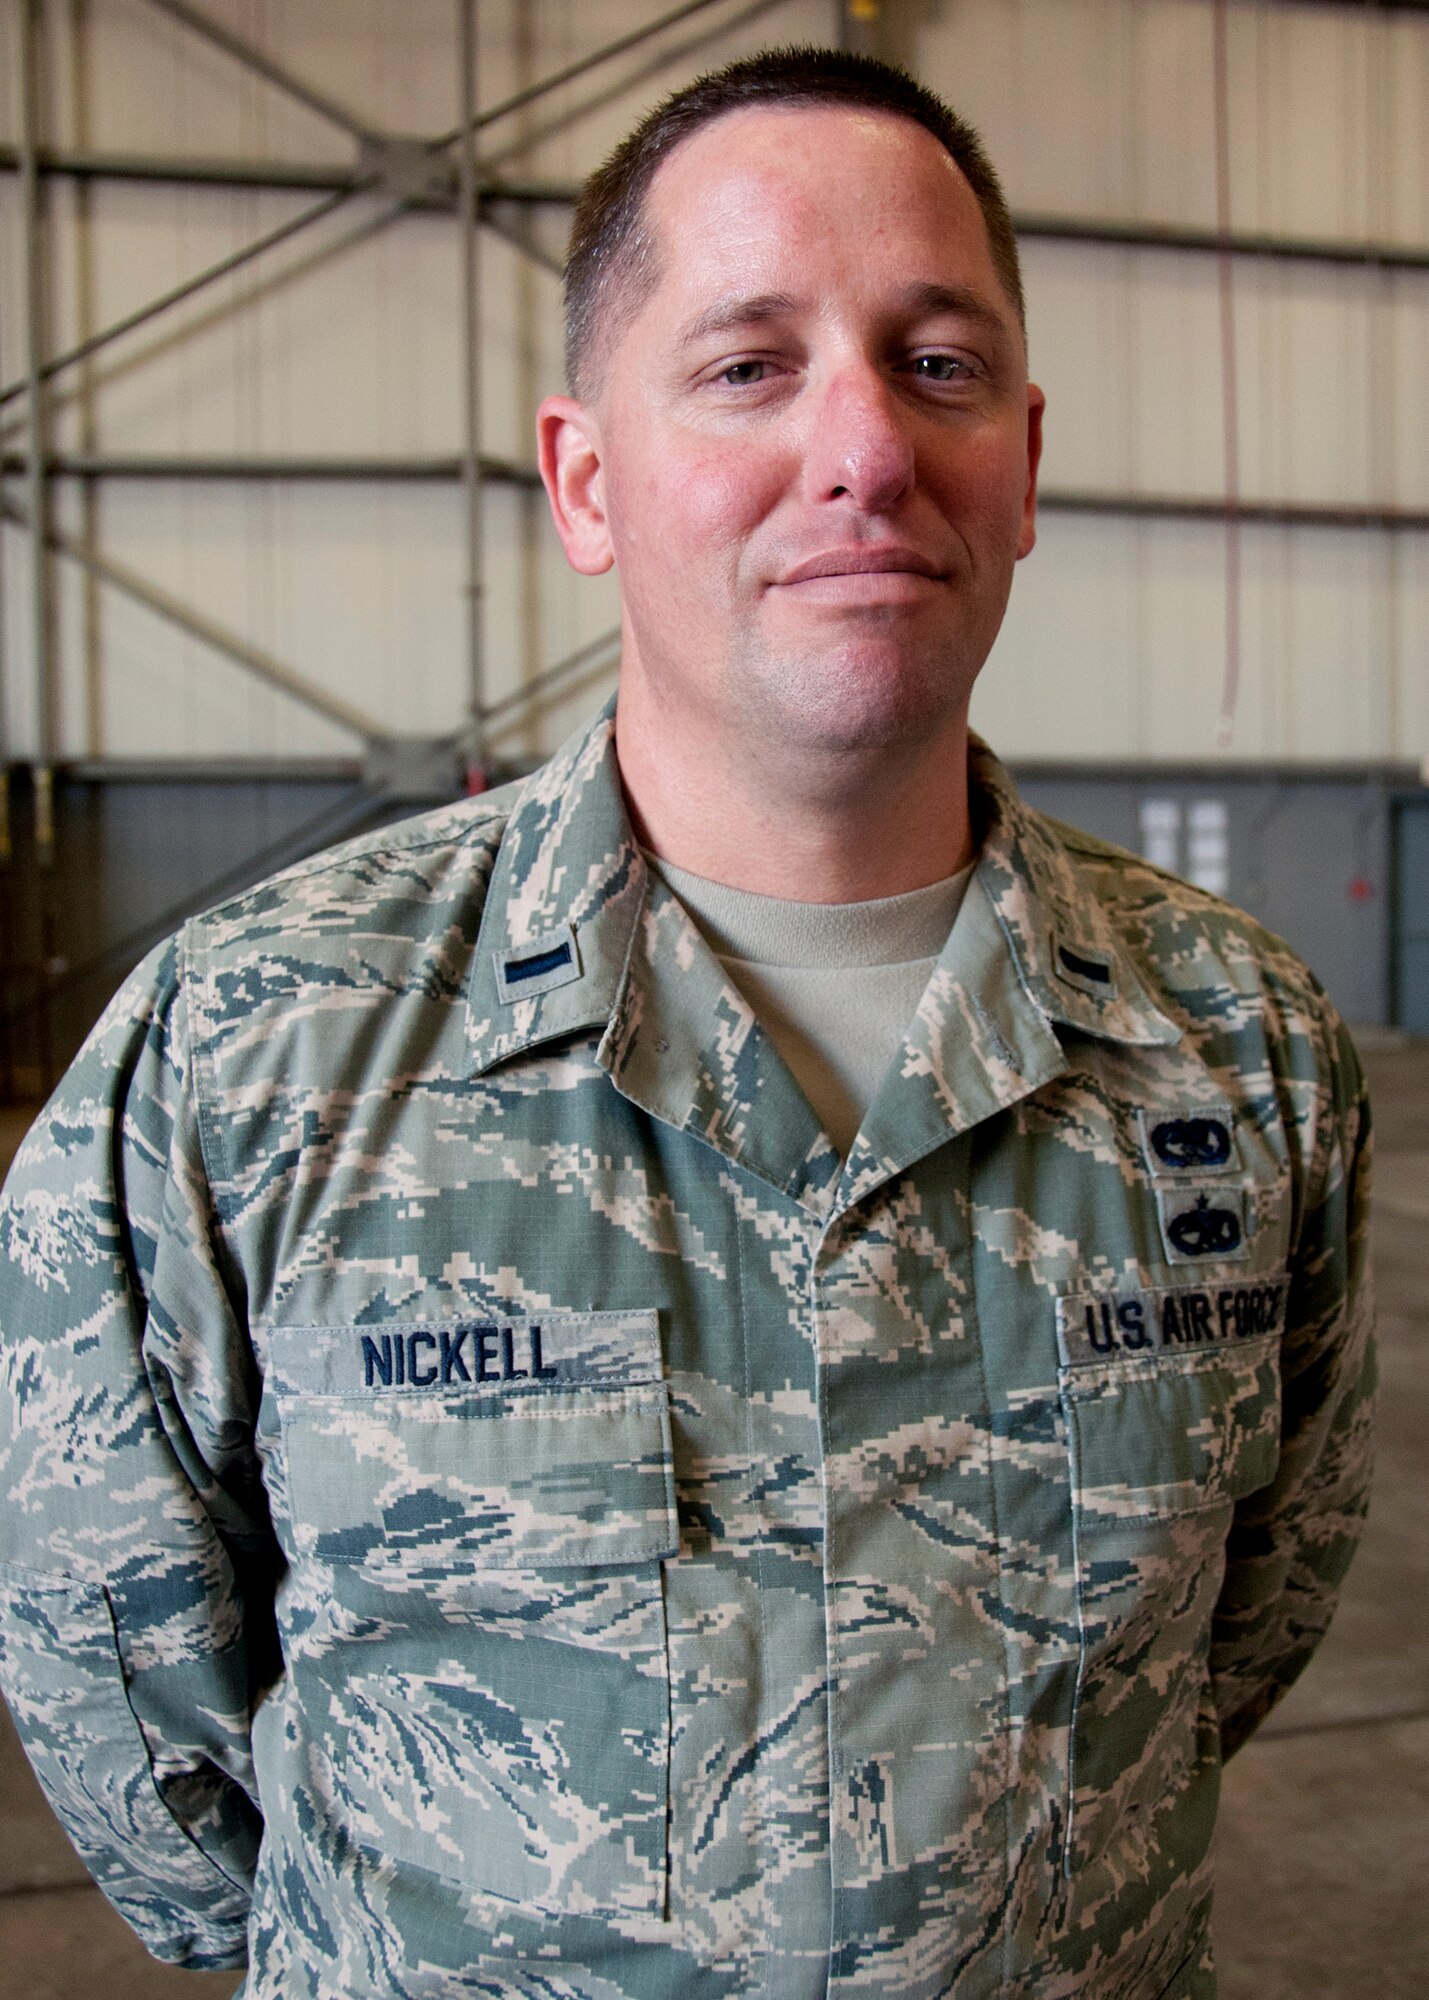 1st Lt. Gentry Nickell said he will wear the uniform until they force him to take it off in honor of his brother who died in Afghanistan.   Nickell is a member of the 919th Special Operations Logistics Readiness Squadron at Duke Field, Fla. (U.S. Air Force photo/Tech. Sgt. Cheryl Foster)